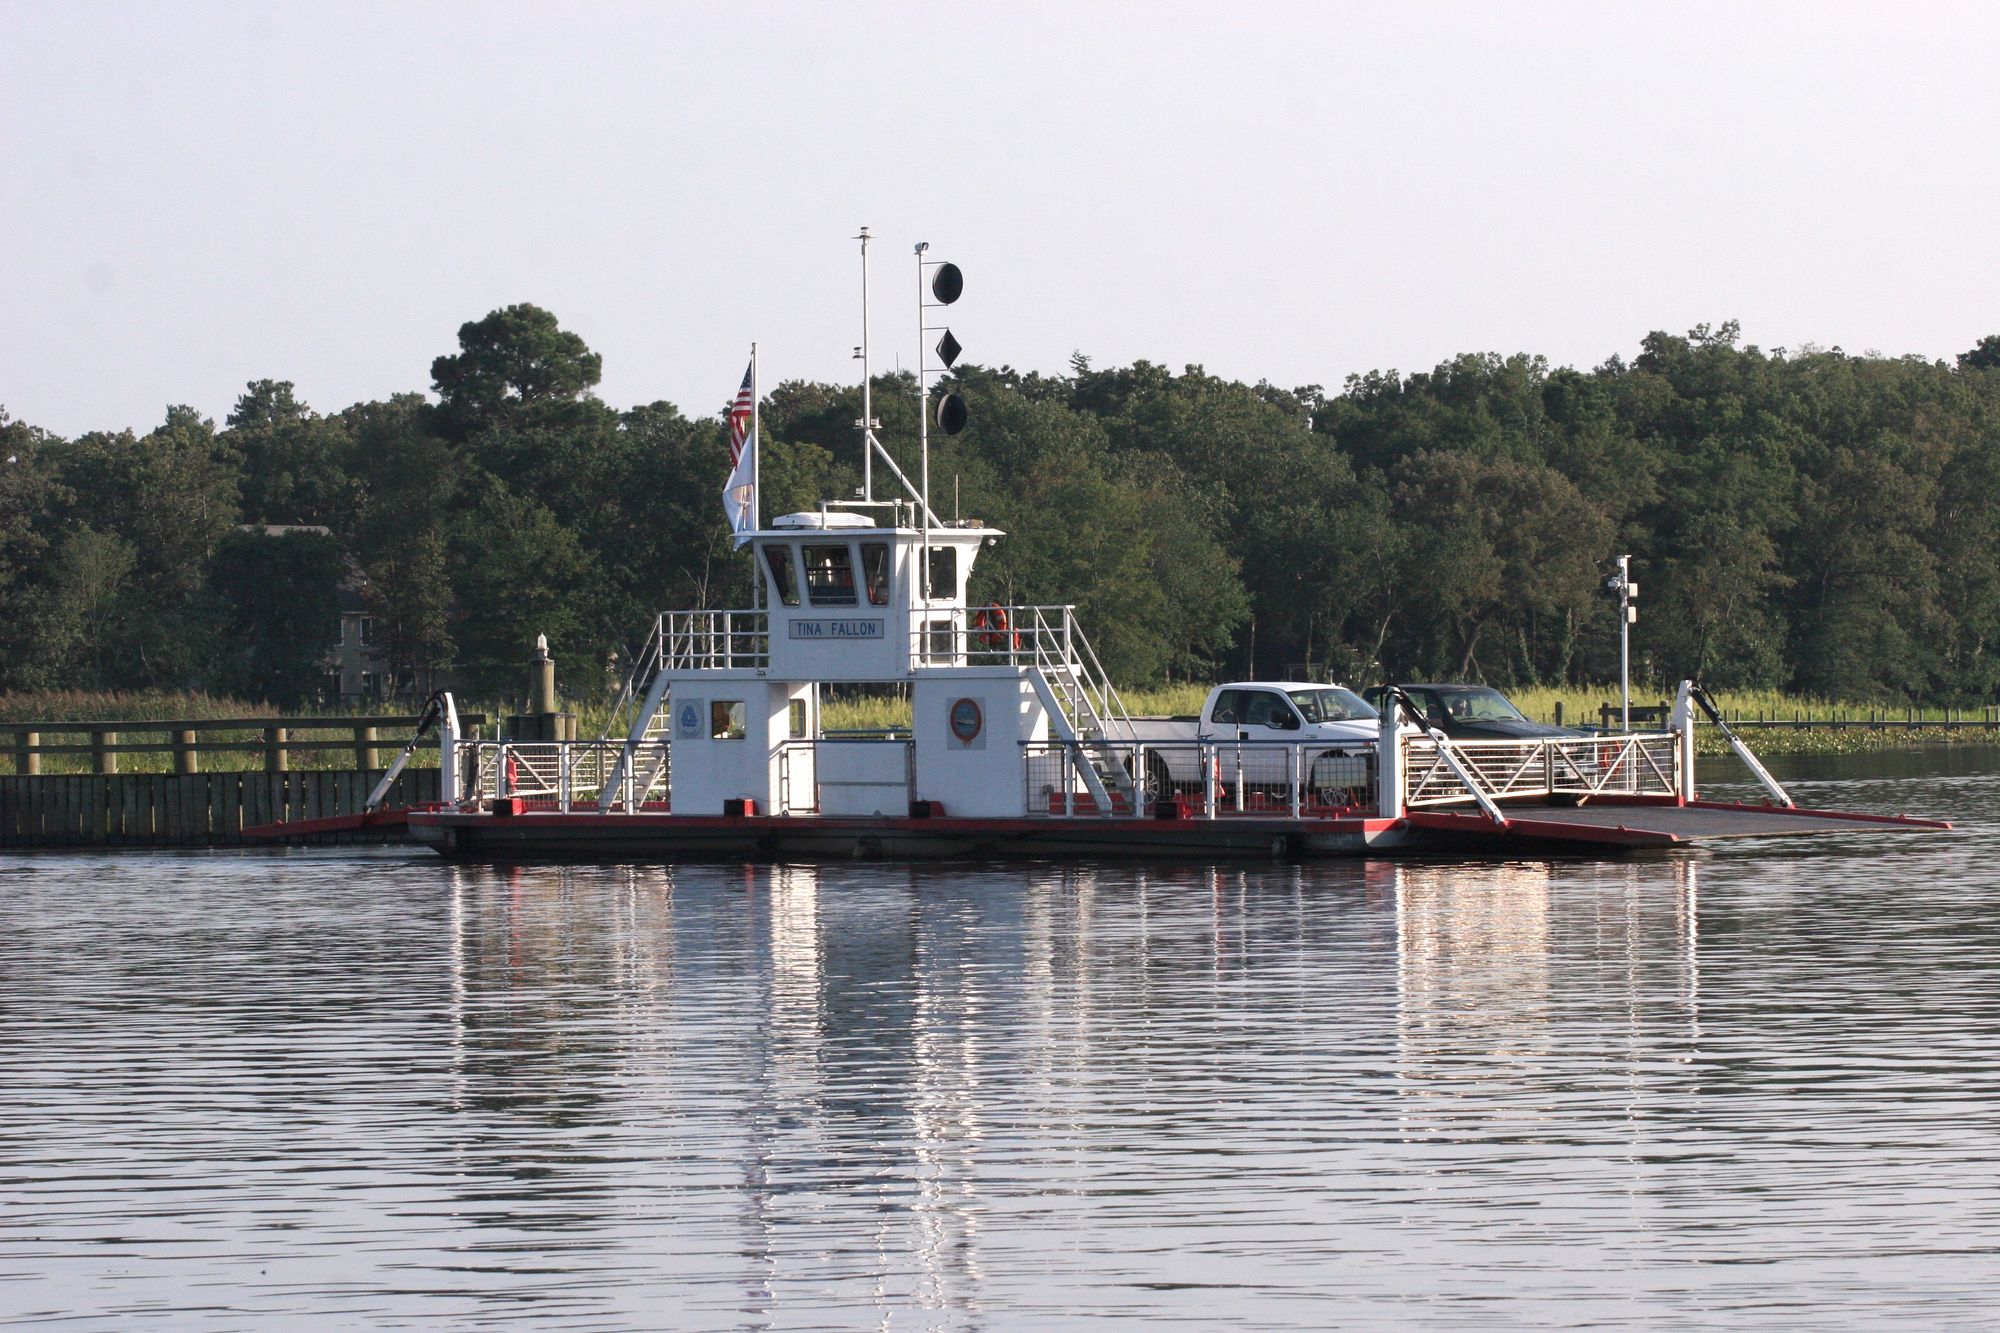 Will the Woodland Ferry's hours return to normal soon?